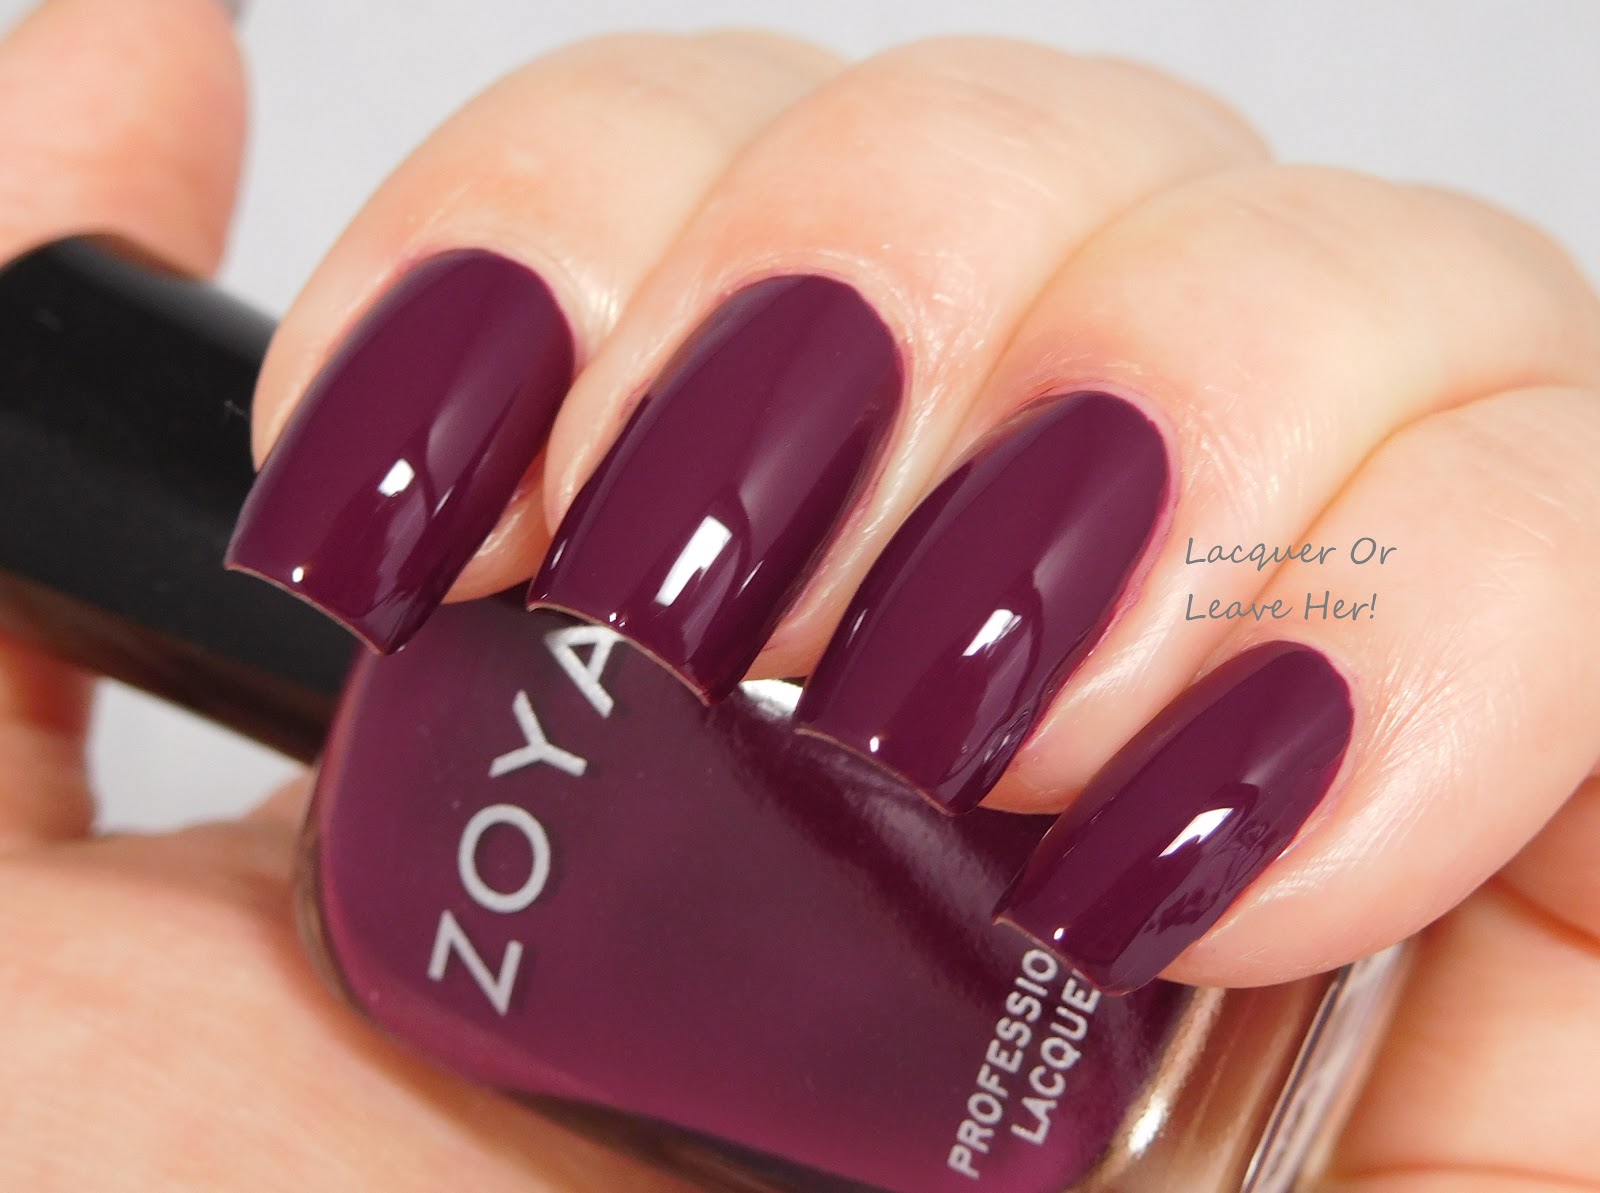 Lacquer or Leave Her!: Review: One-coat cremes from the Zoya Urban ...